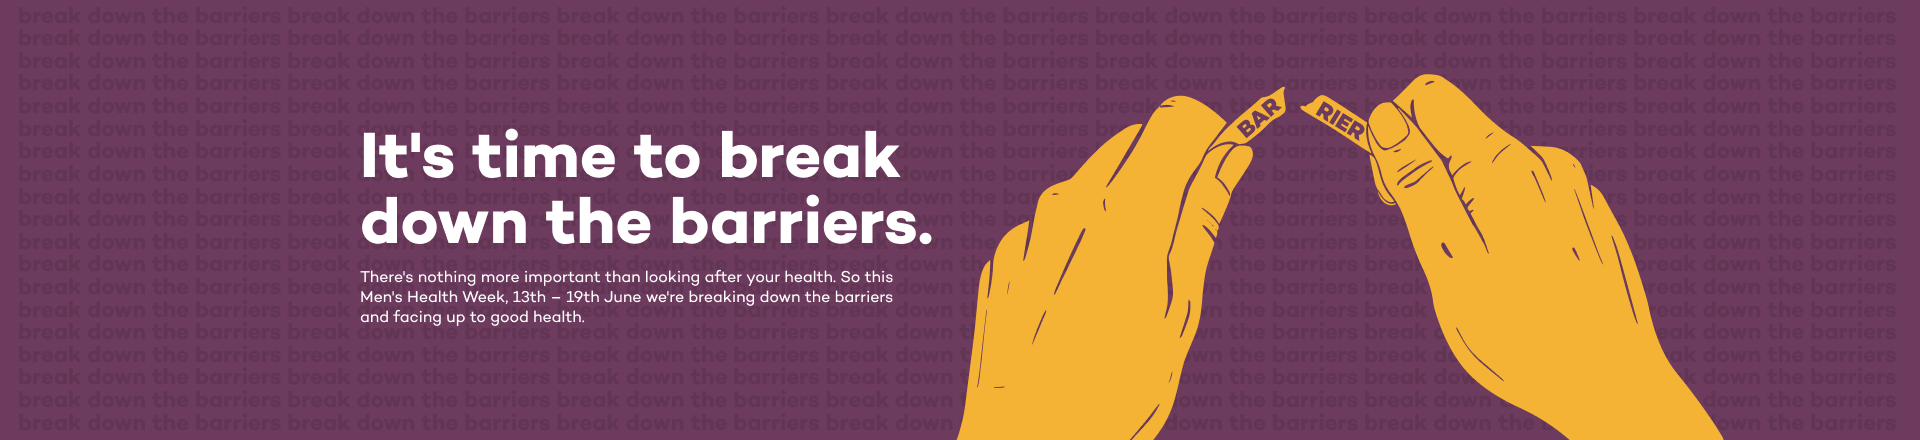 Banner image: It's time to break down the barriers.